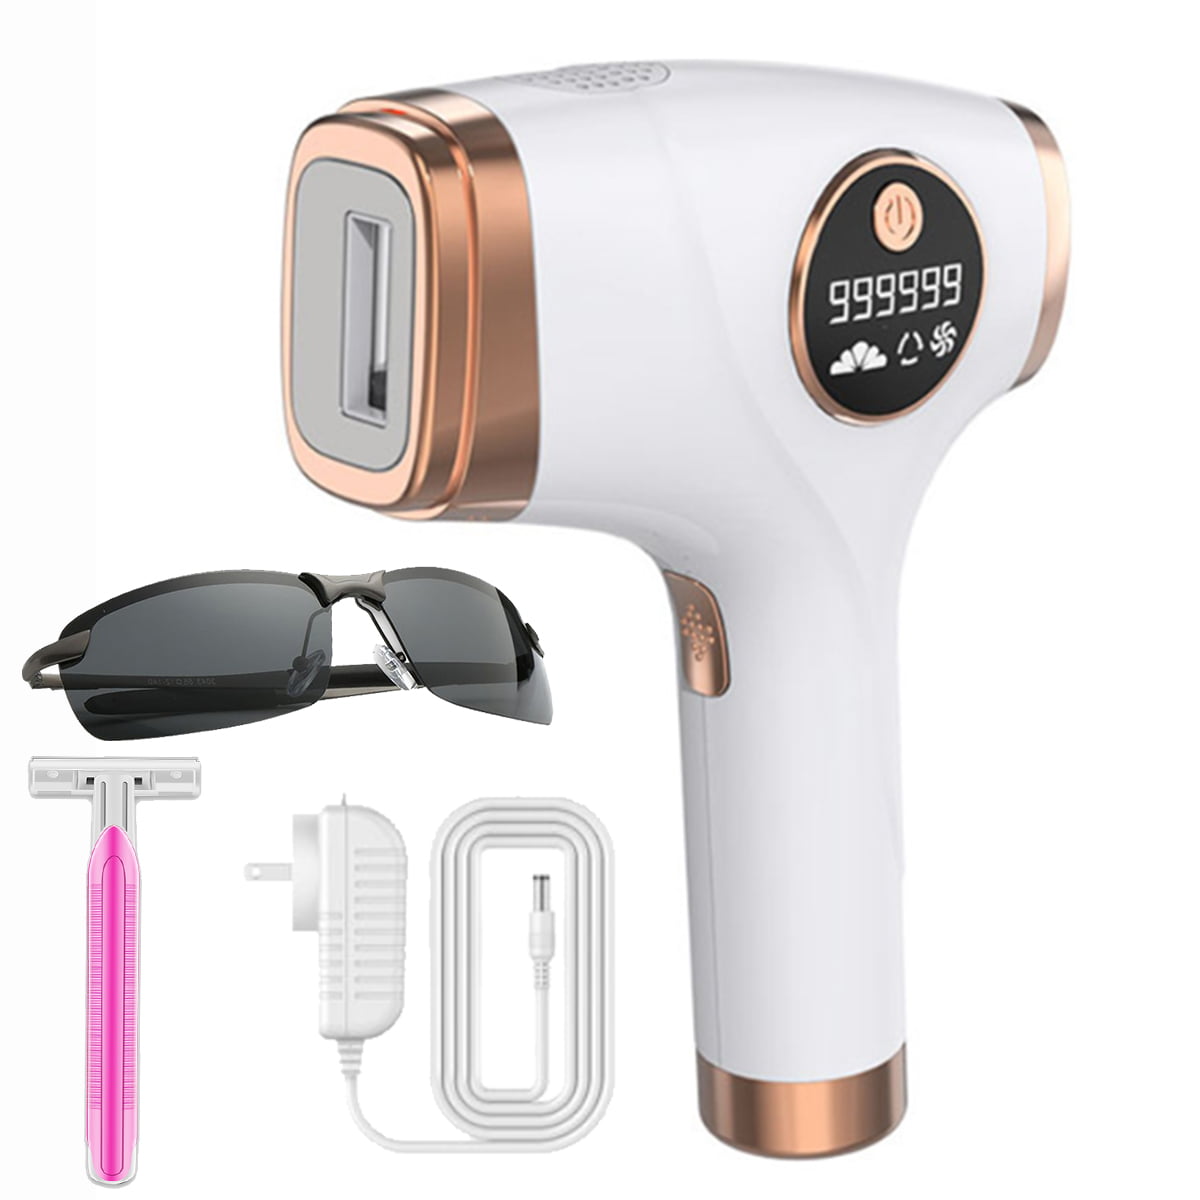 Professional IPL Laser Hair Removal Machine for Women